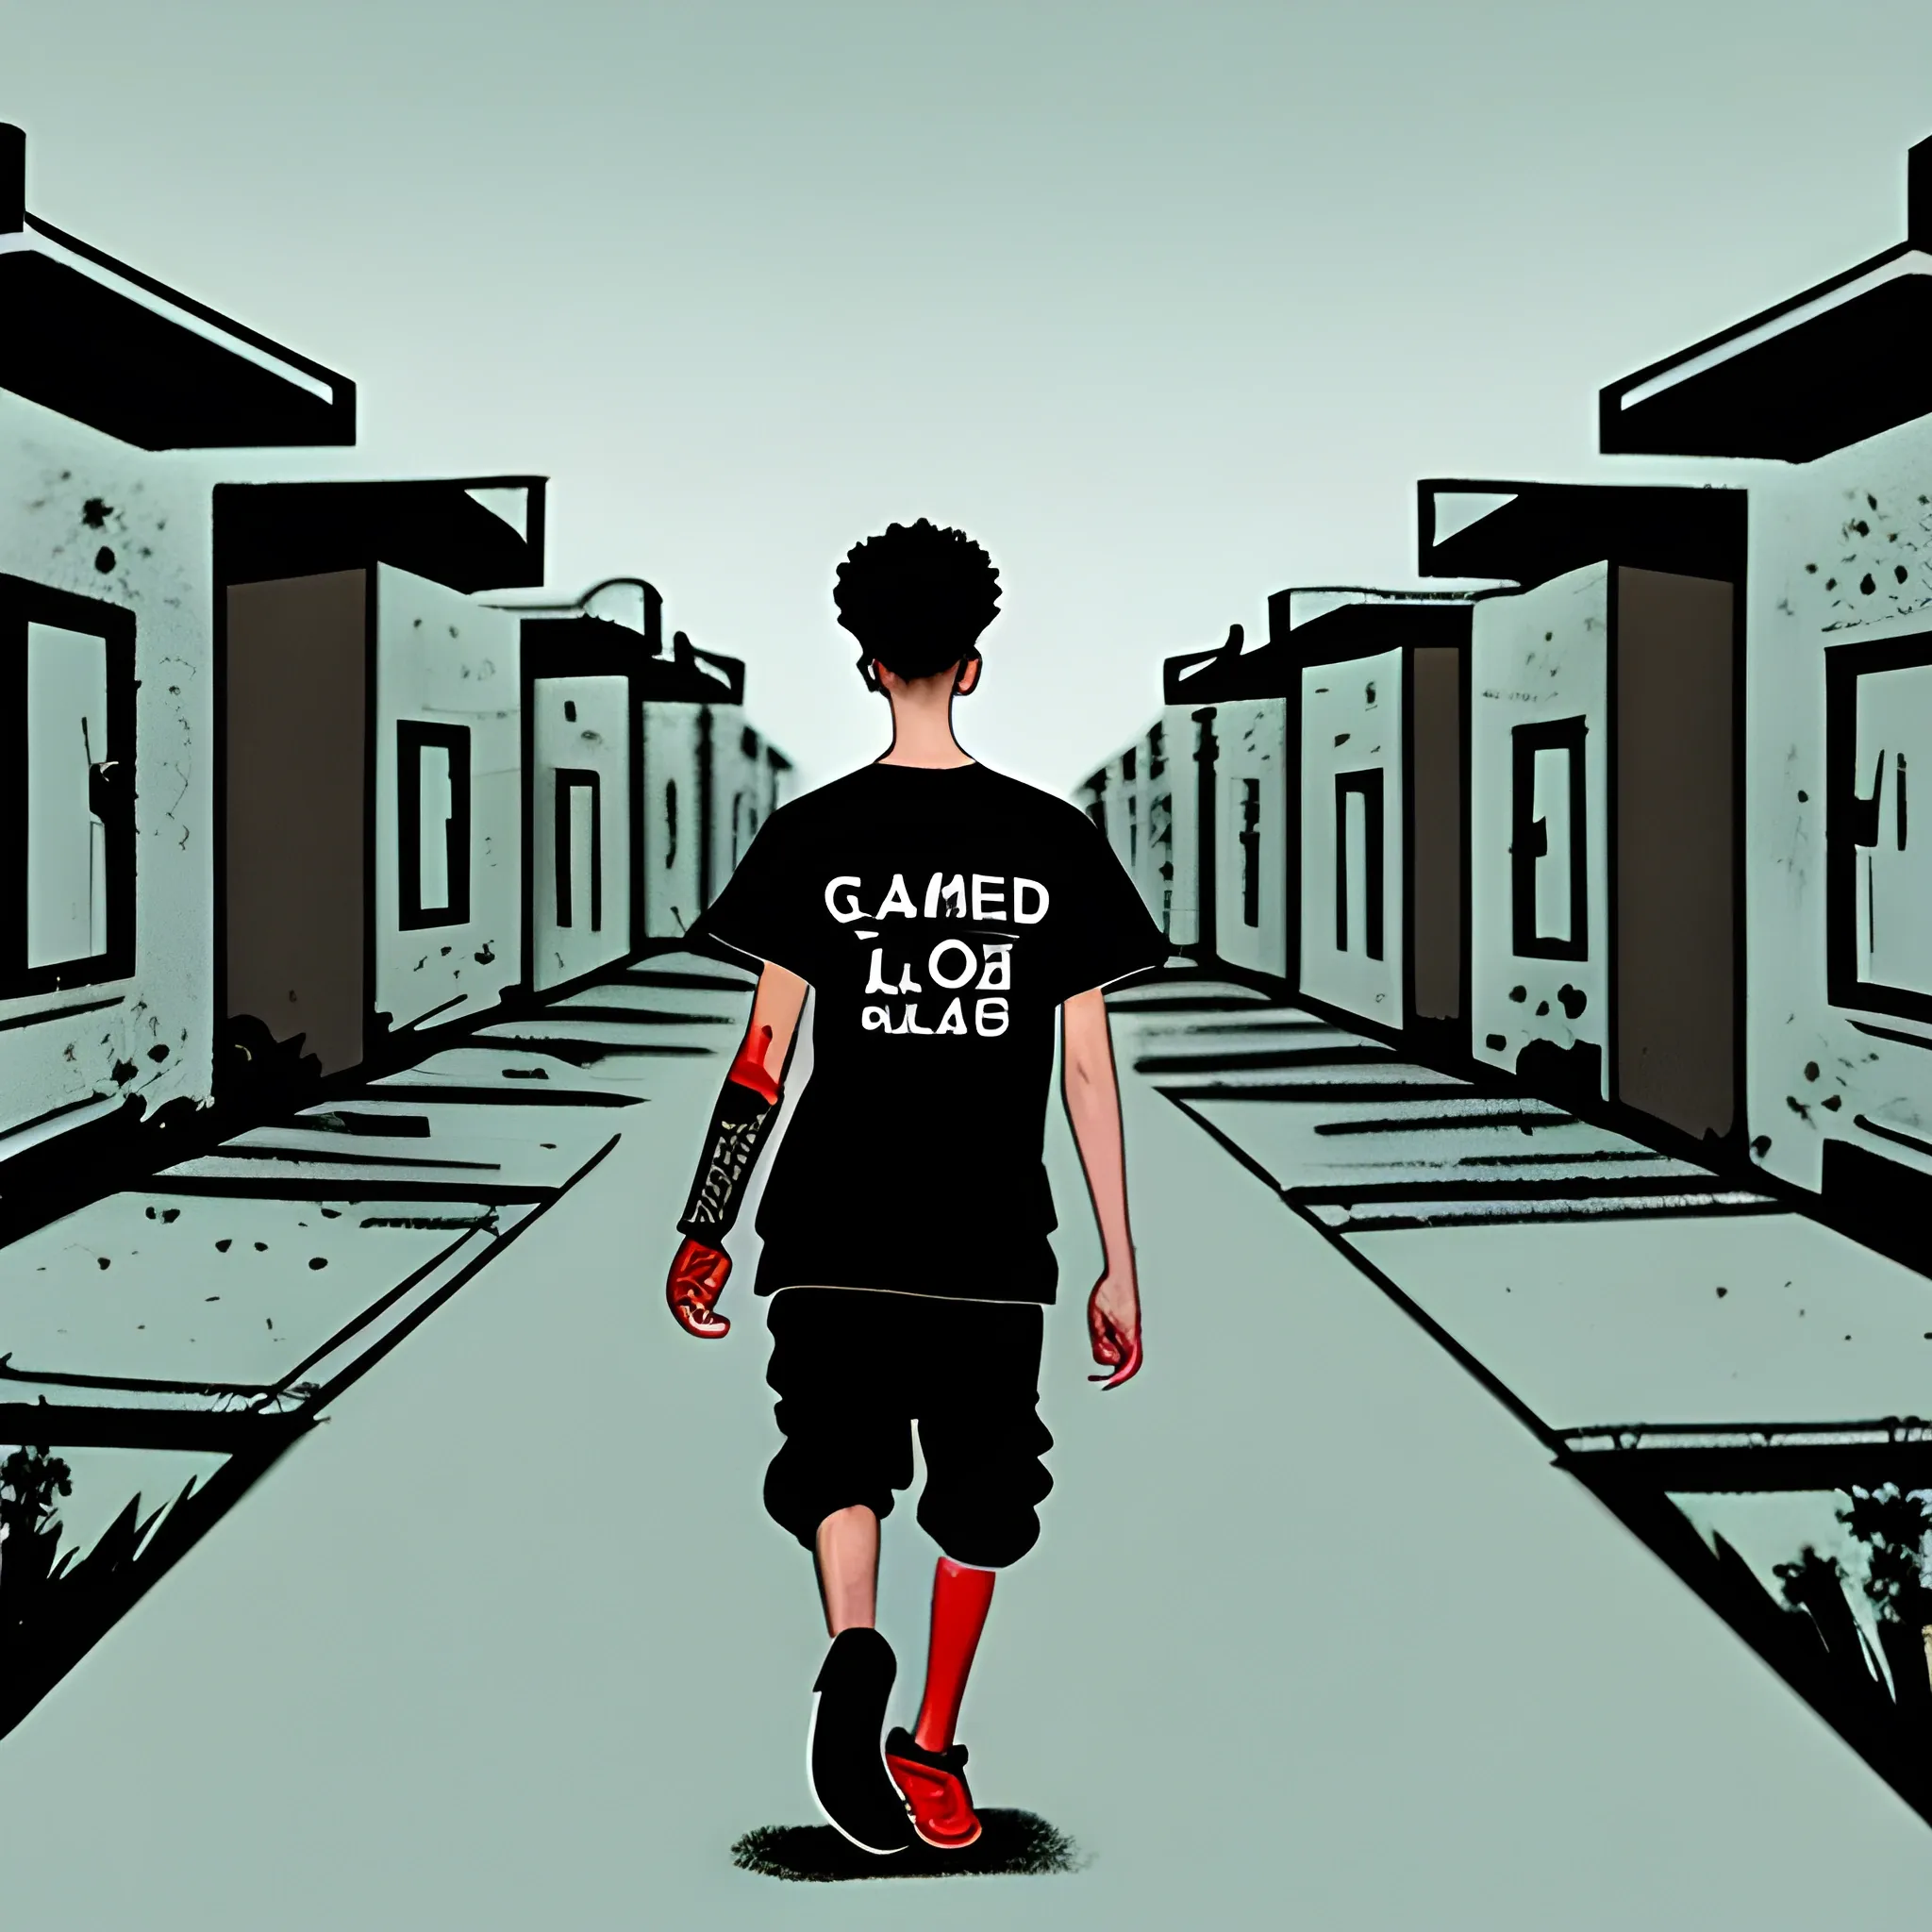 A 21-year-old blood gang member walking backwards through an American housing project, at night.  With Moving Backwards written on his t-shirt.  Cartoon

